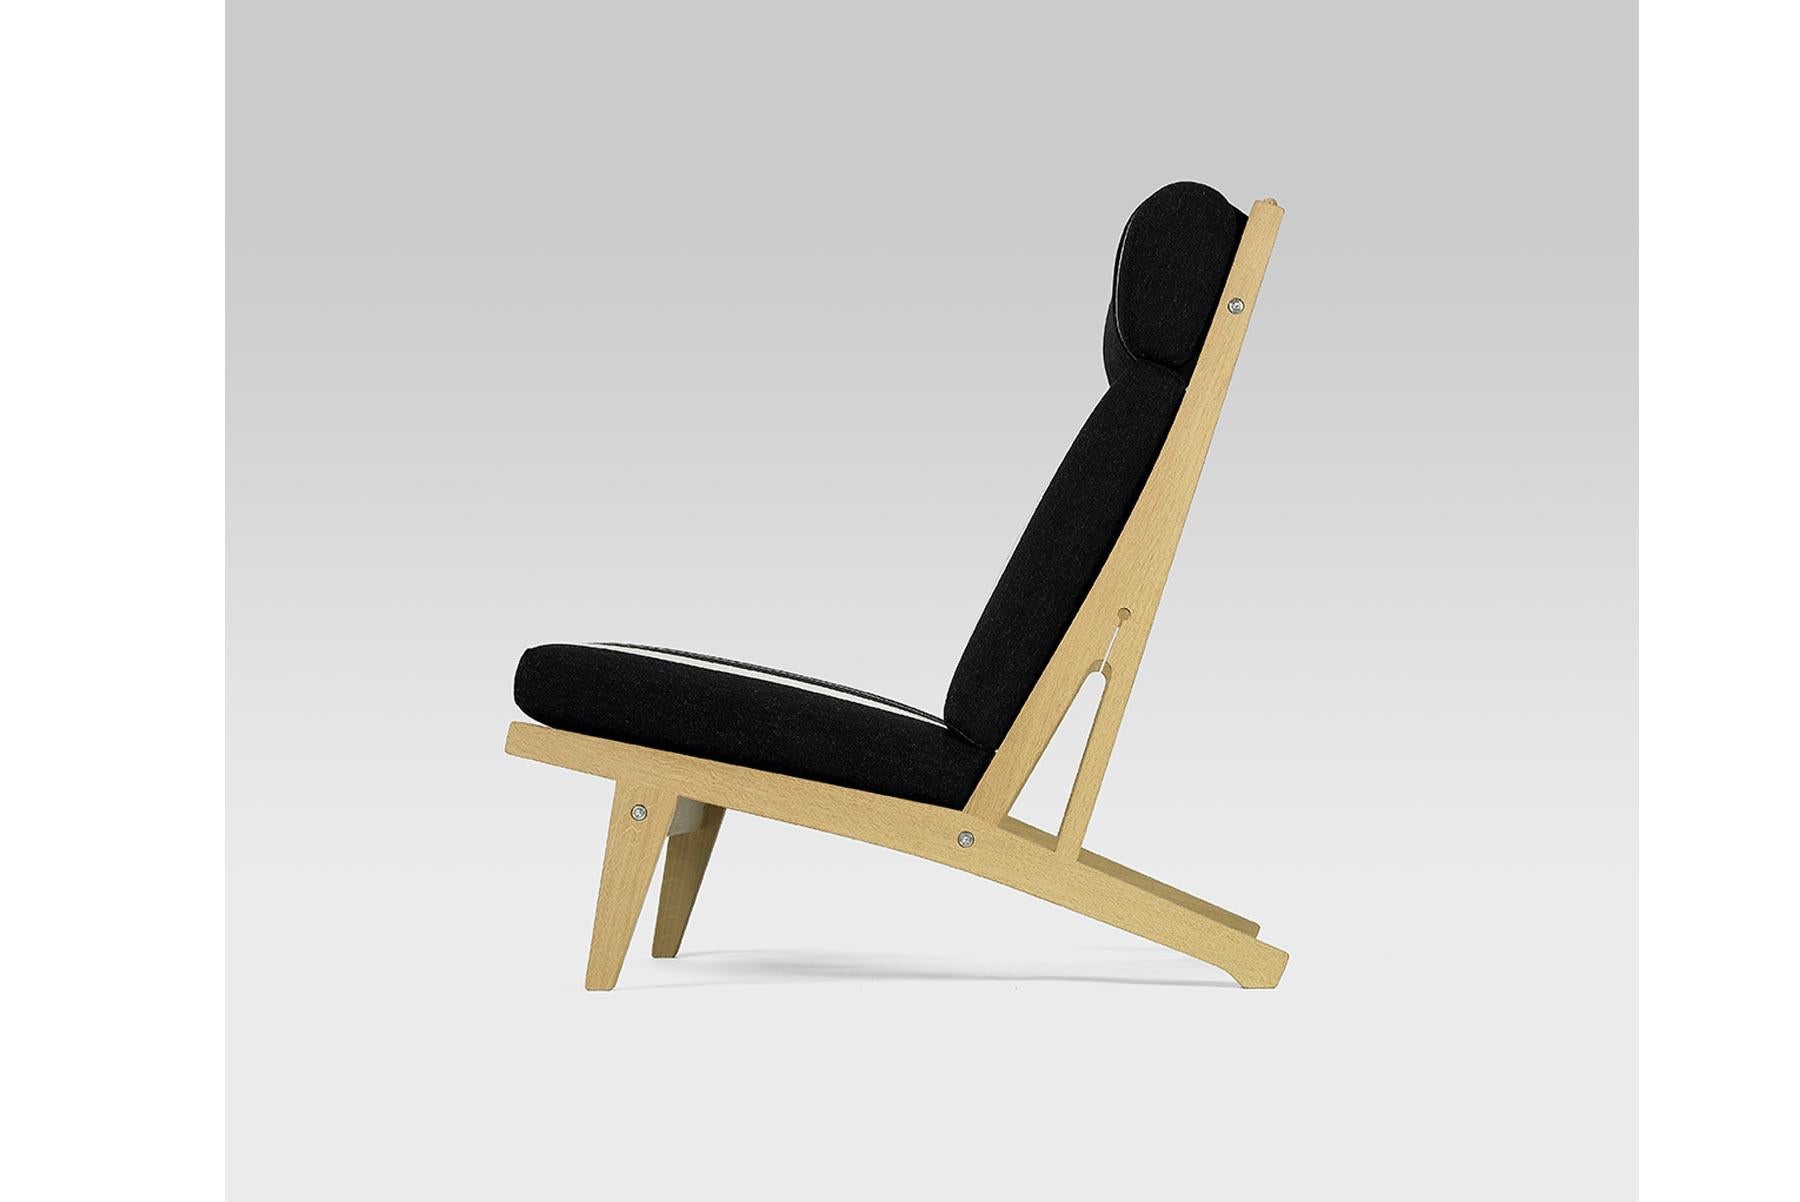 Designed in 1969 by Hans Wegner, the 375A lounge chair pairs clean lines with remarkable craftsmanship. The chair is handcrafted at GETAMA’s factory in Gedsted, Denmark by skilled cabinetmakers using traditional Scandinavian techniques.

Available